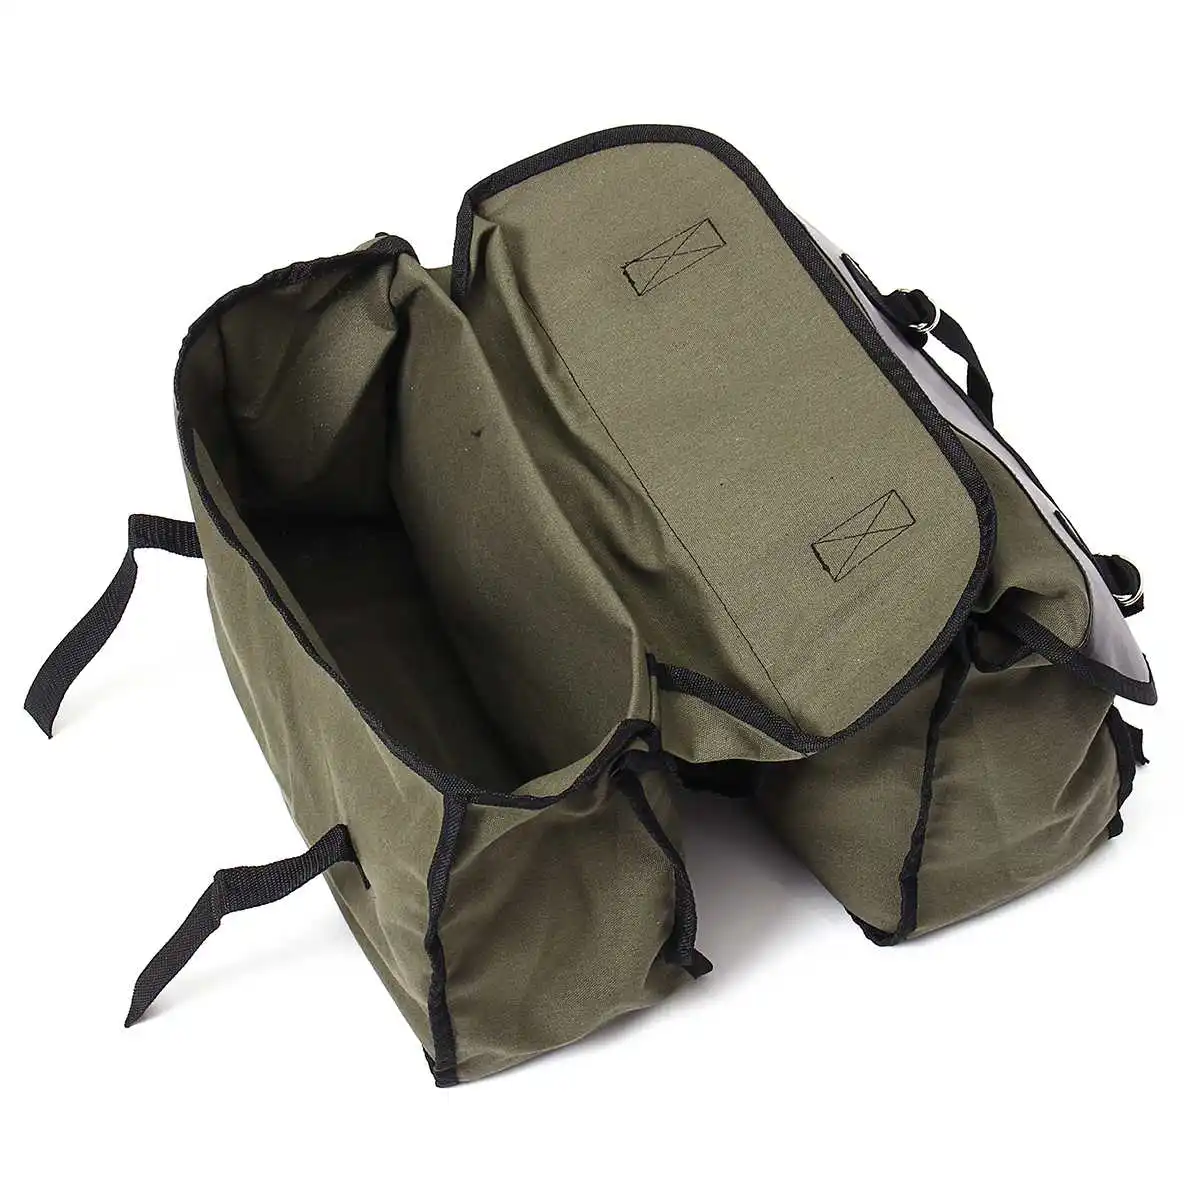 

26L Army Green Canvas Motorcycle Saddle Bags Equine Back Pack For Honda For Taotao For Suzuki dr 650 For kawasaki 1000 / 19